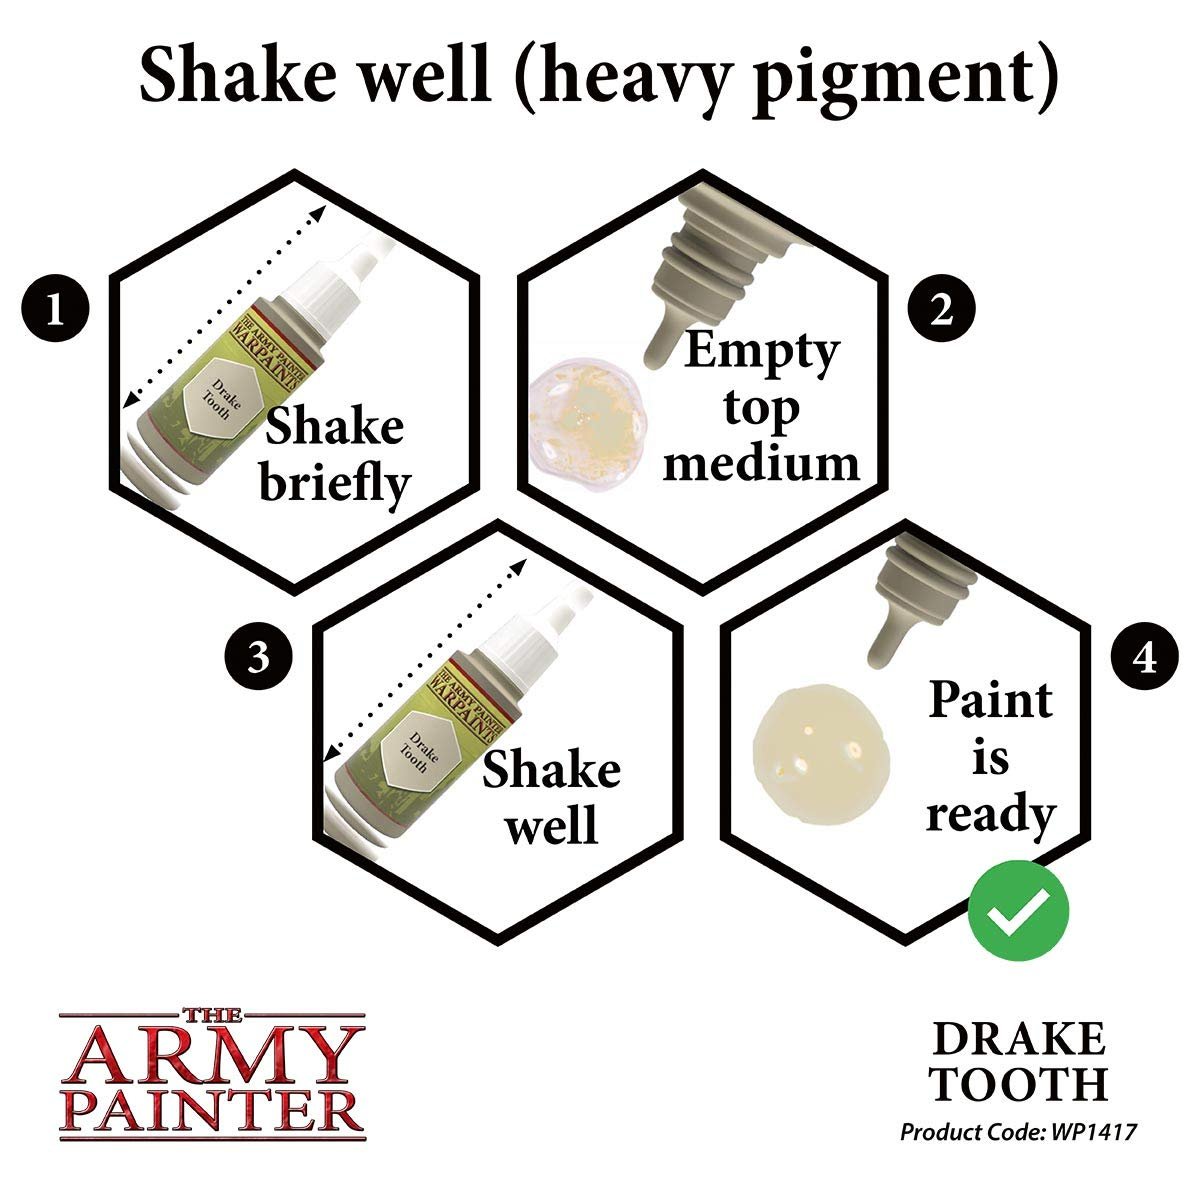 The Army Painter - Warpaints: Drake Tooth (18ml/0.6oz)